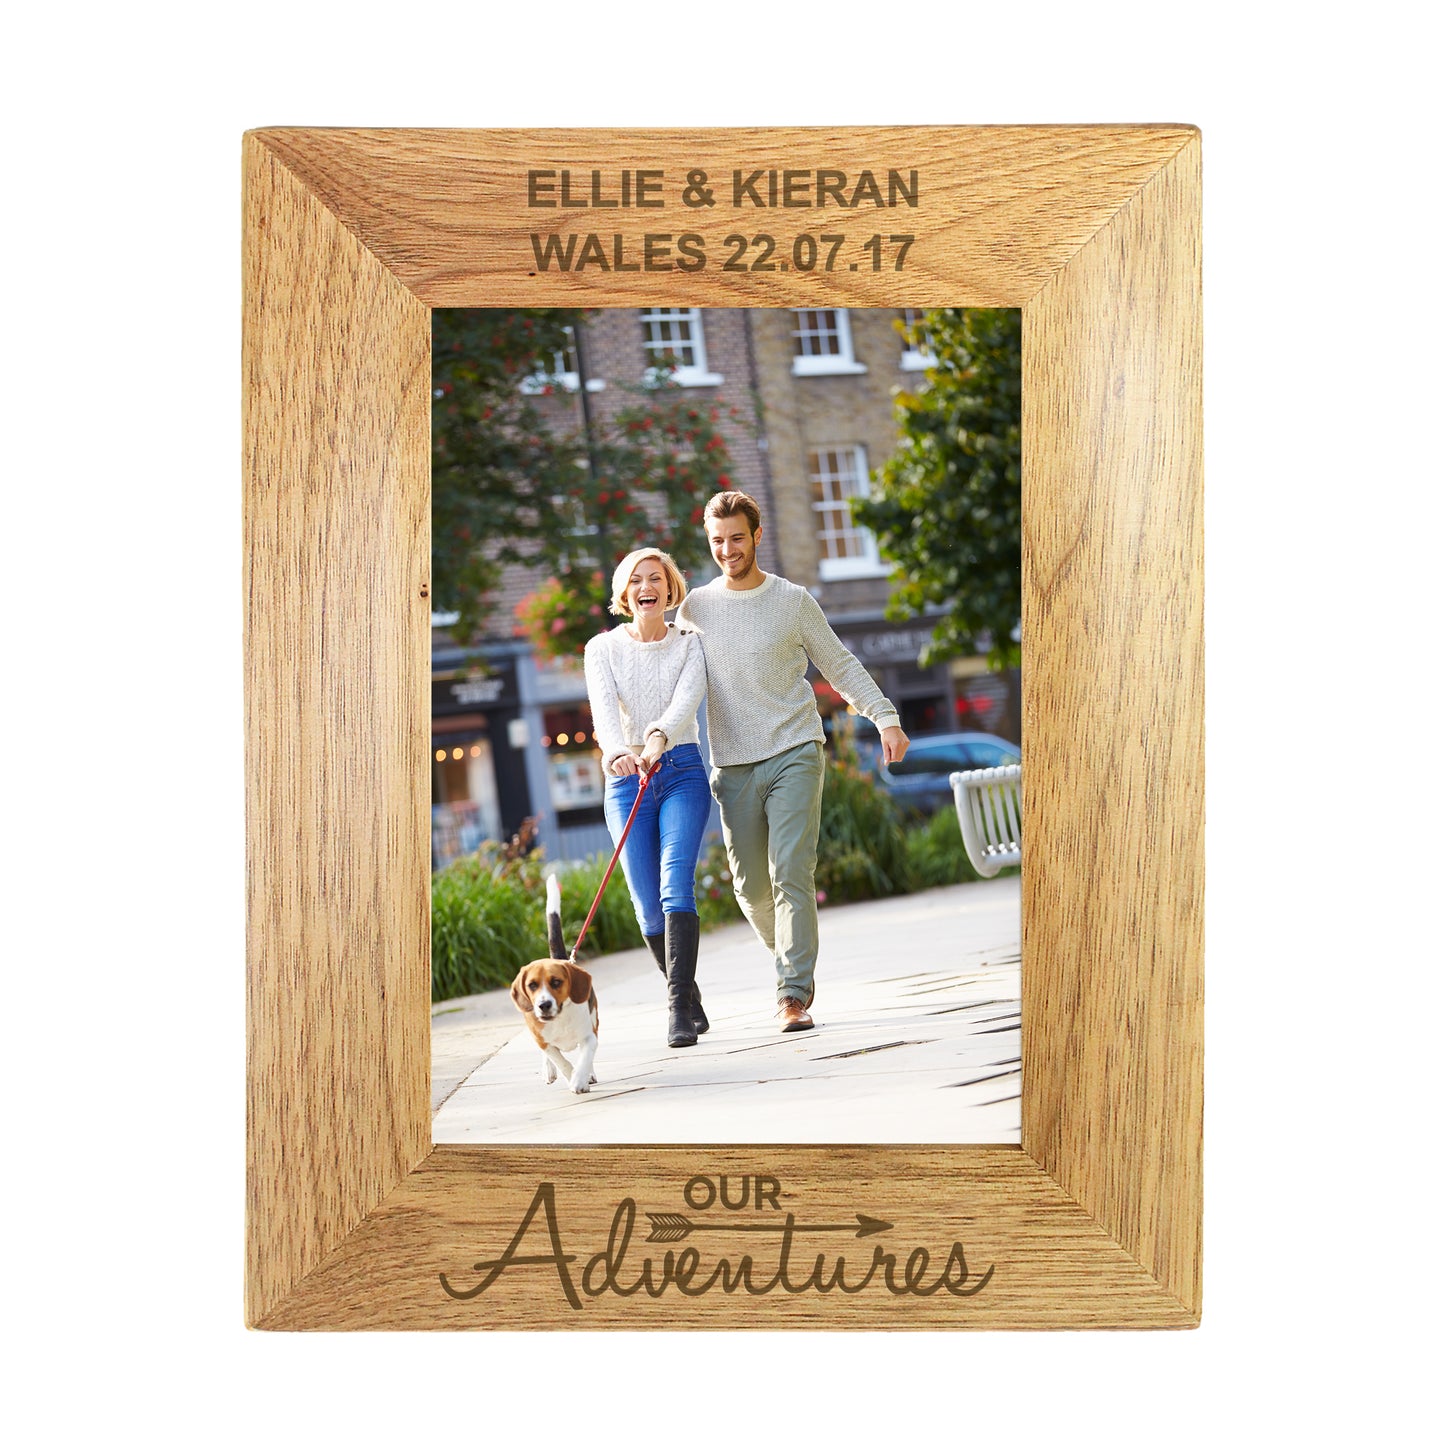 Personalised Our Adventures 5x7 Wooden Photo Frame - Personalise It!